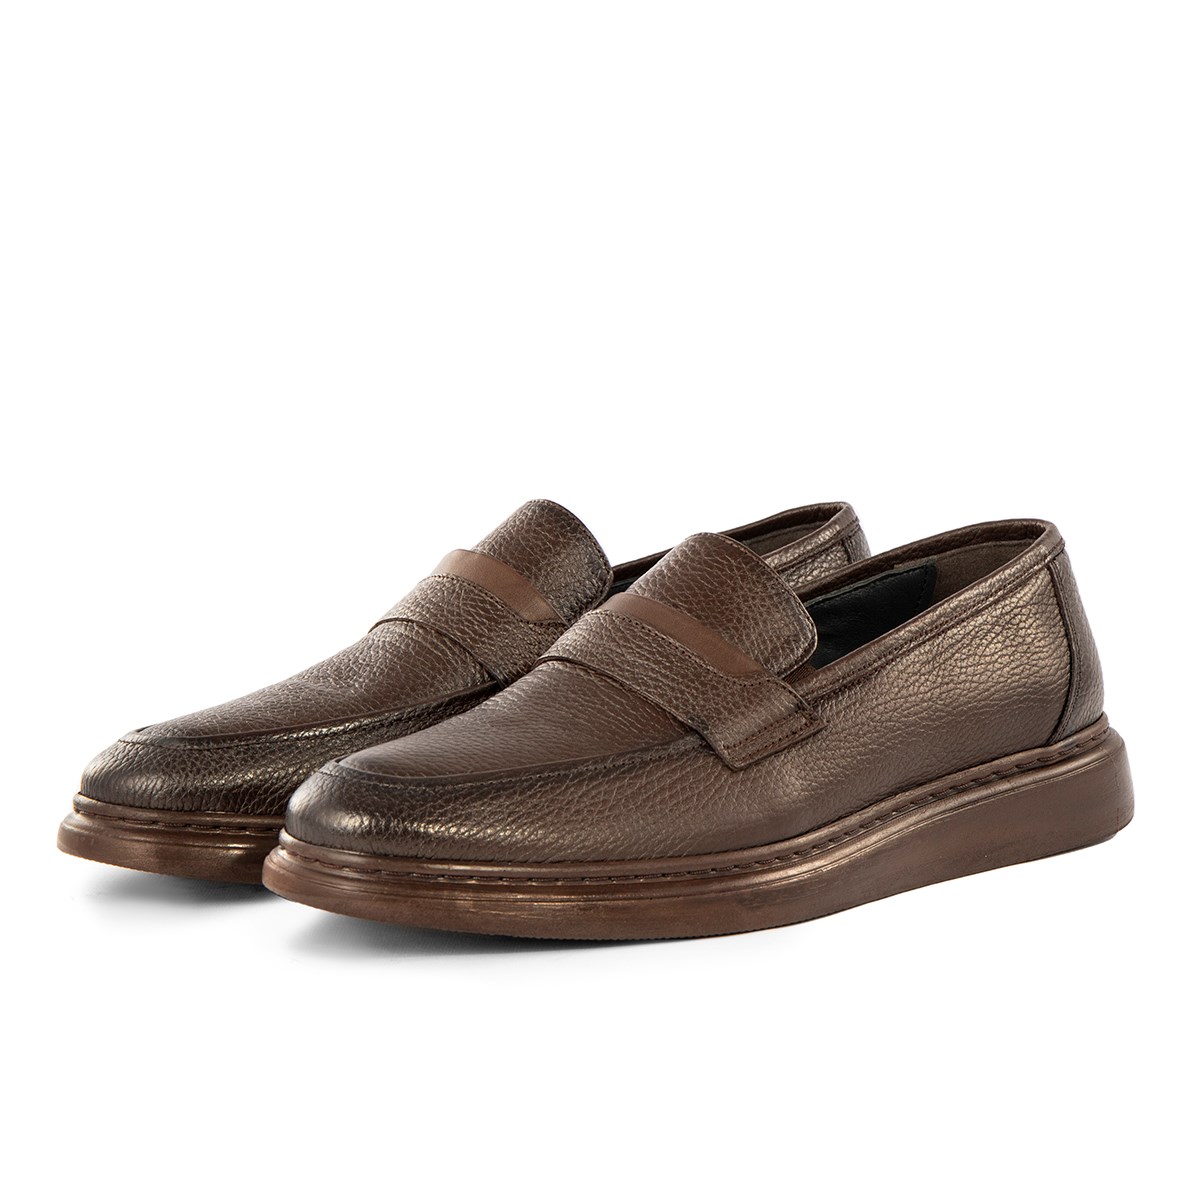 Frio Genuine Leather, Loafer Classic